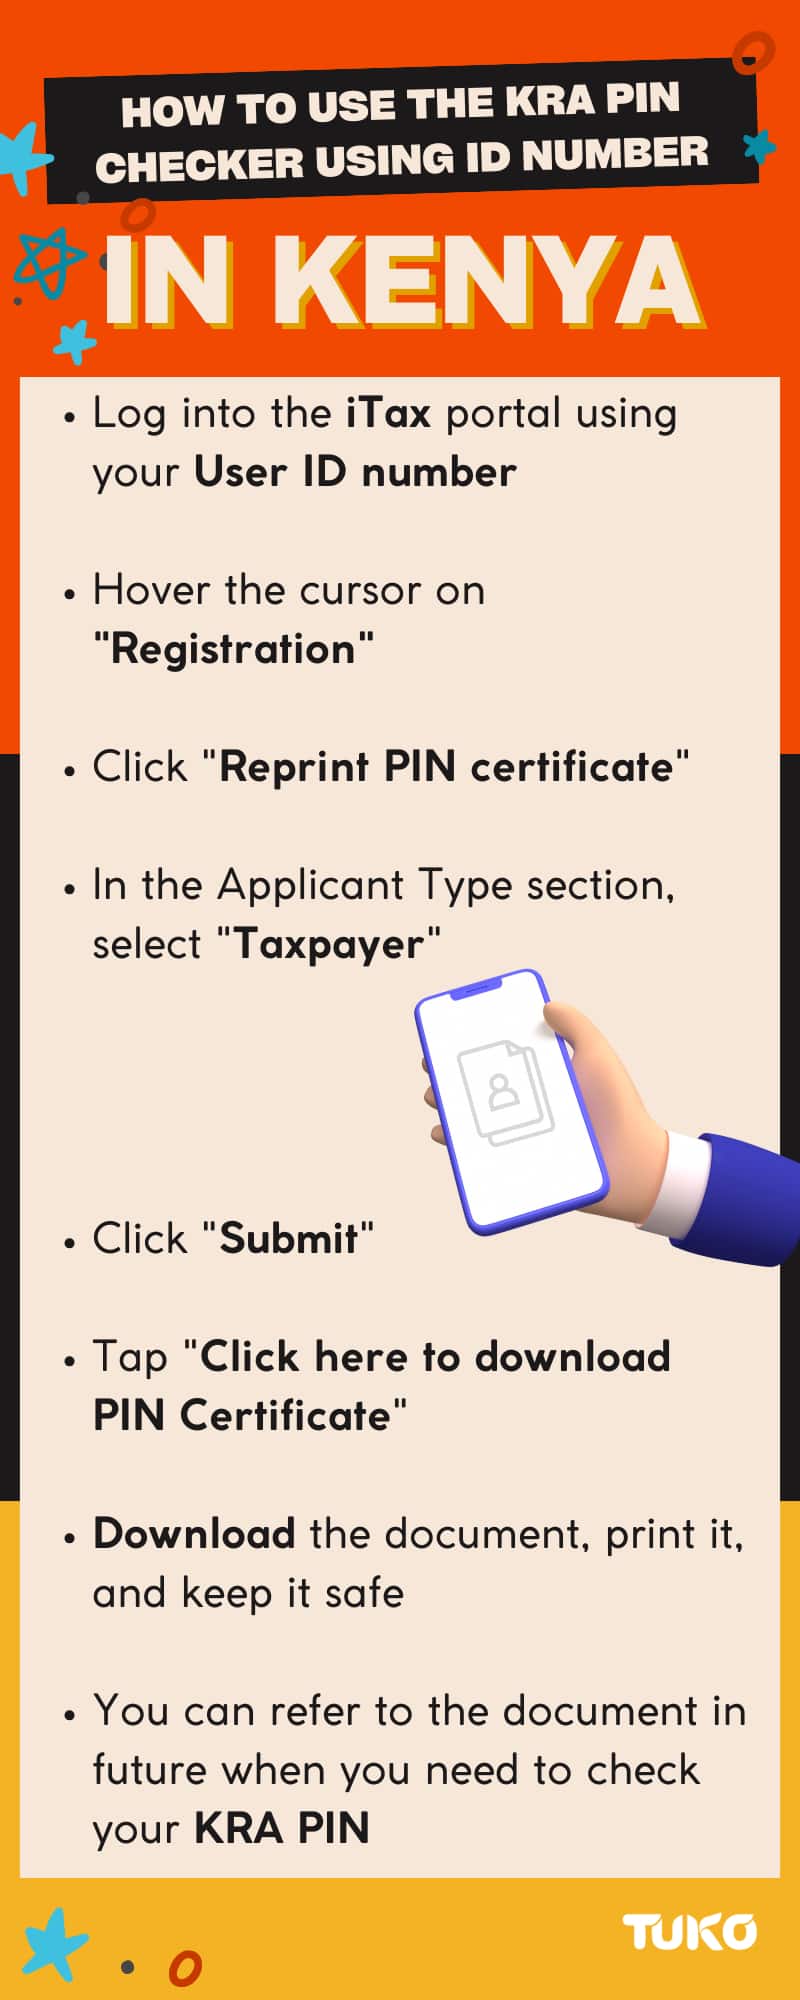 How to check your KRA PIN using an ID number